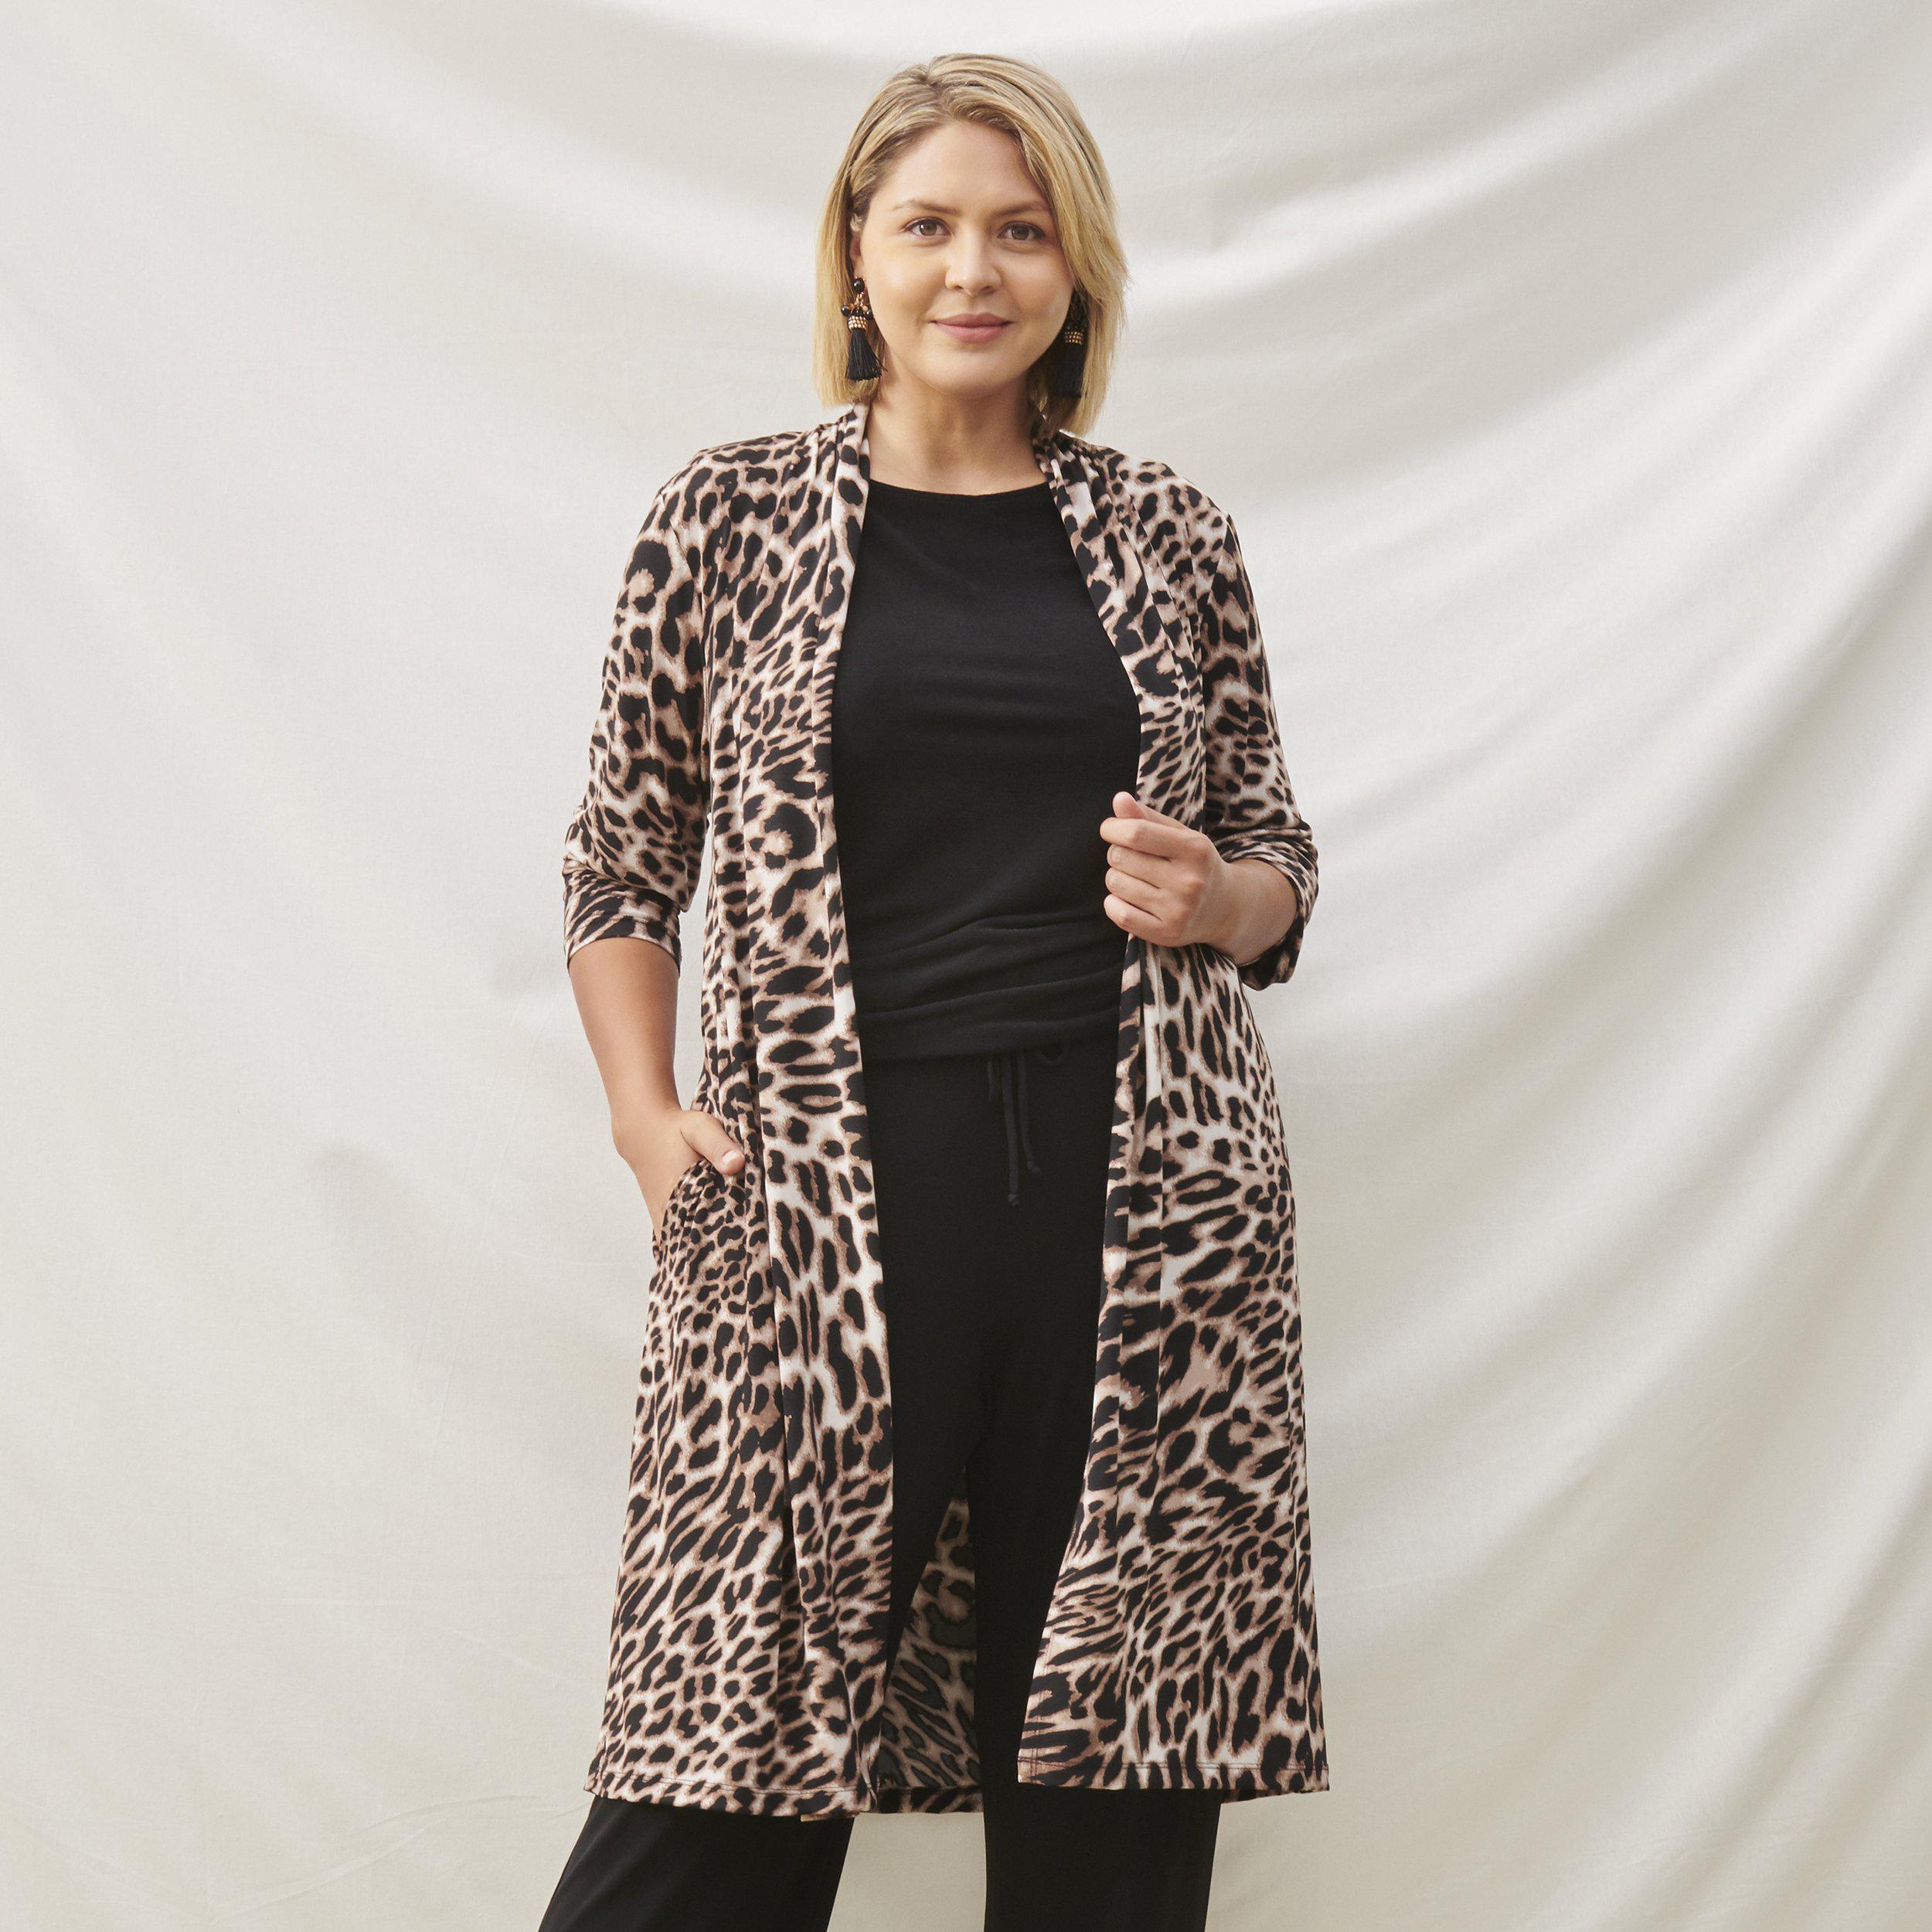 Woman posing wearing - CAxLZ Bianca Leopard Print Cardigan from Connected Apparel